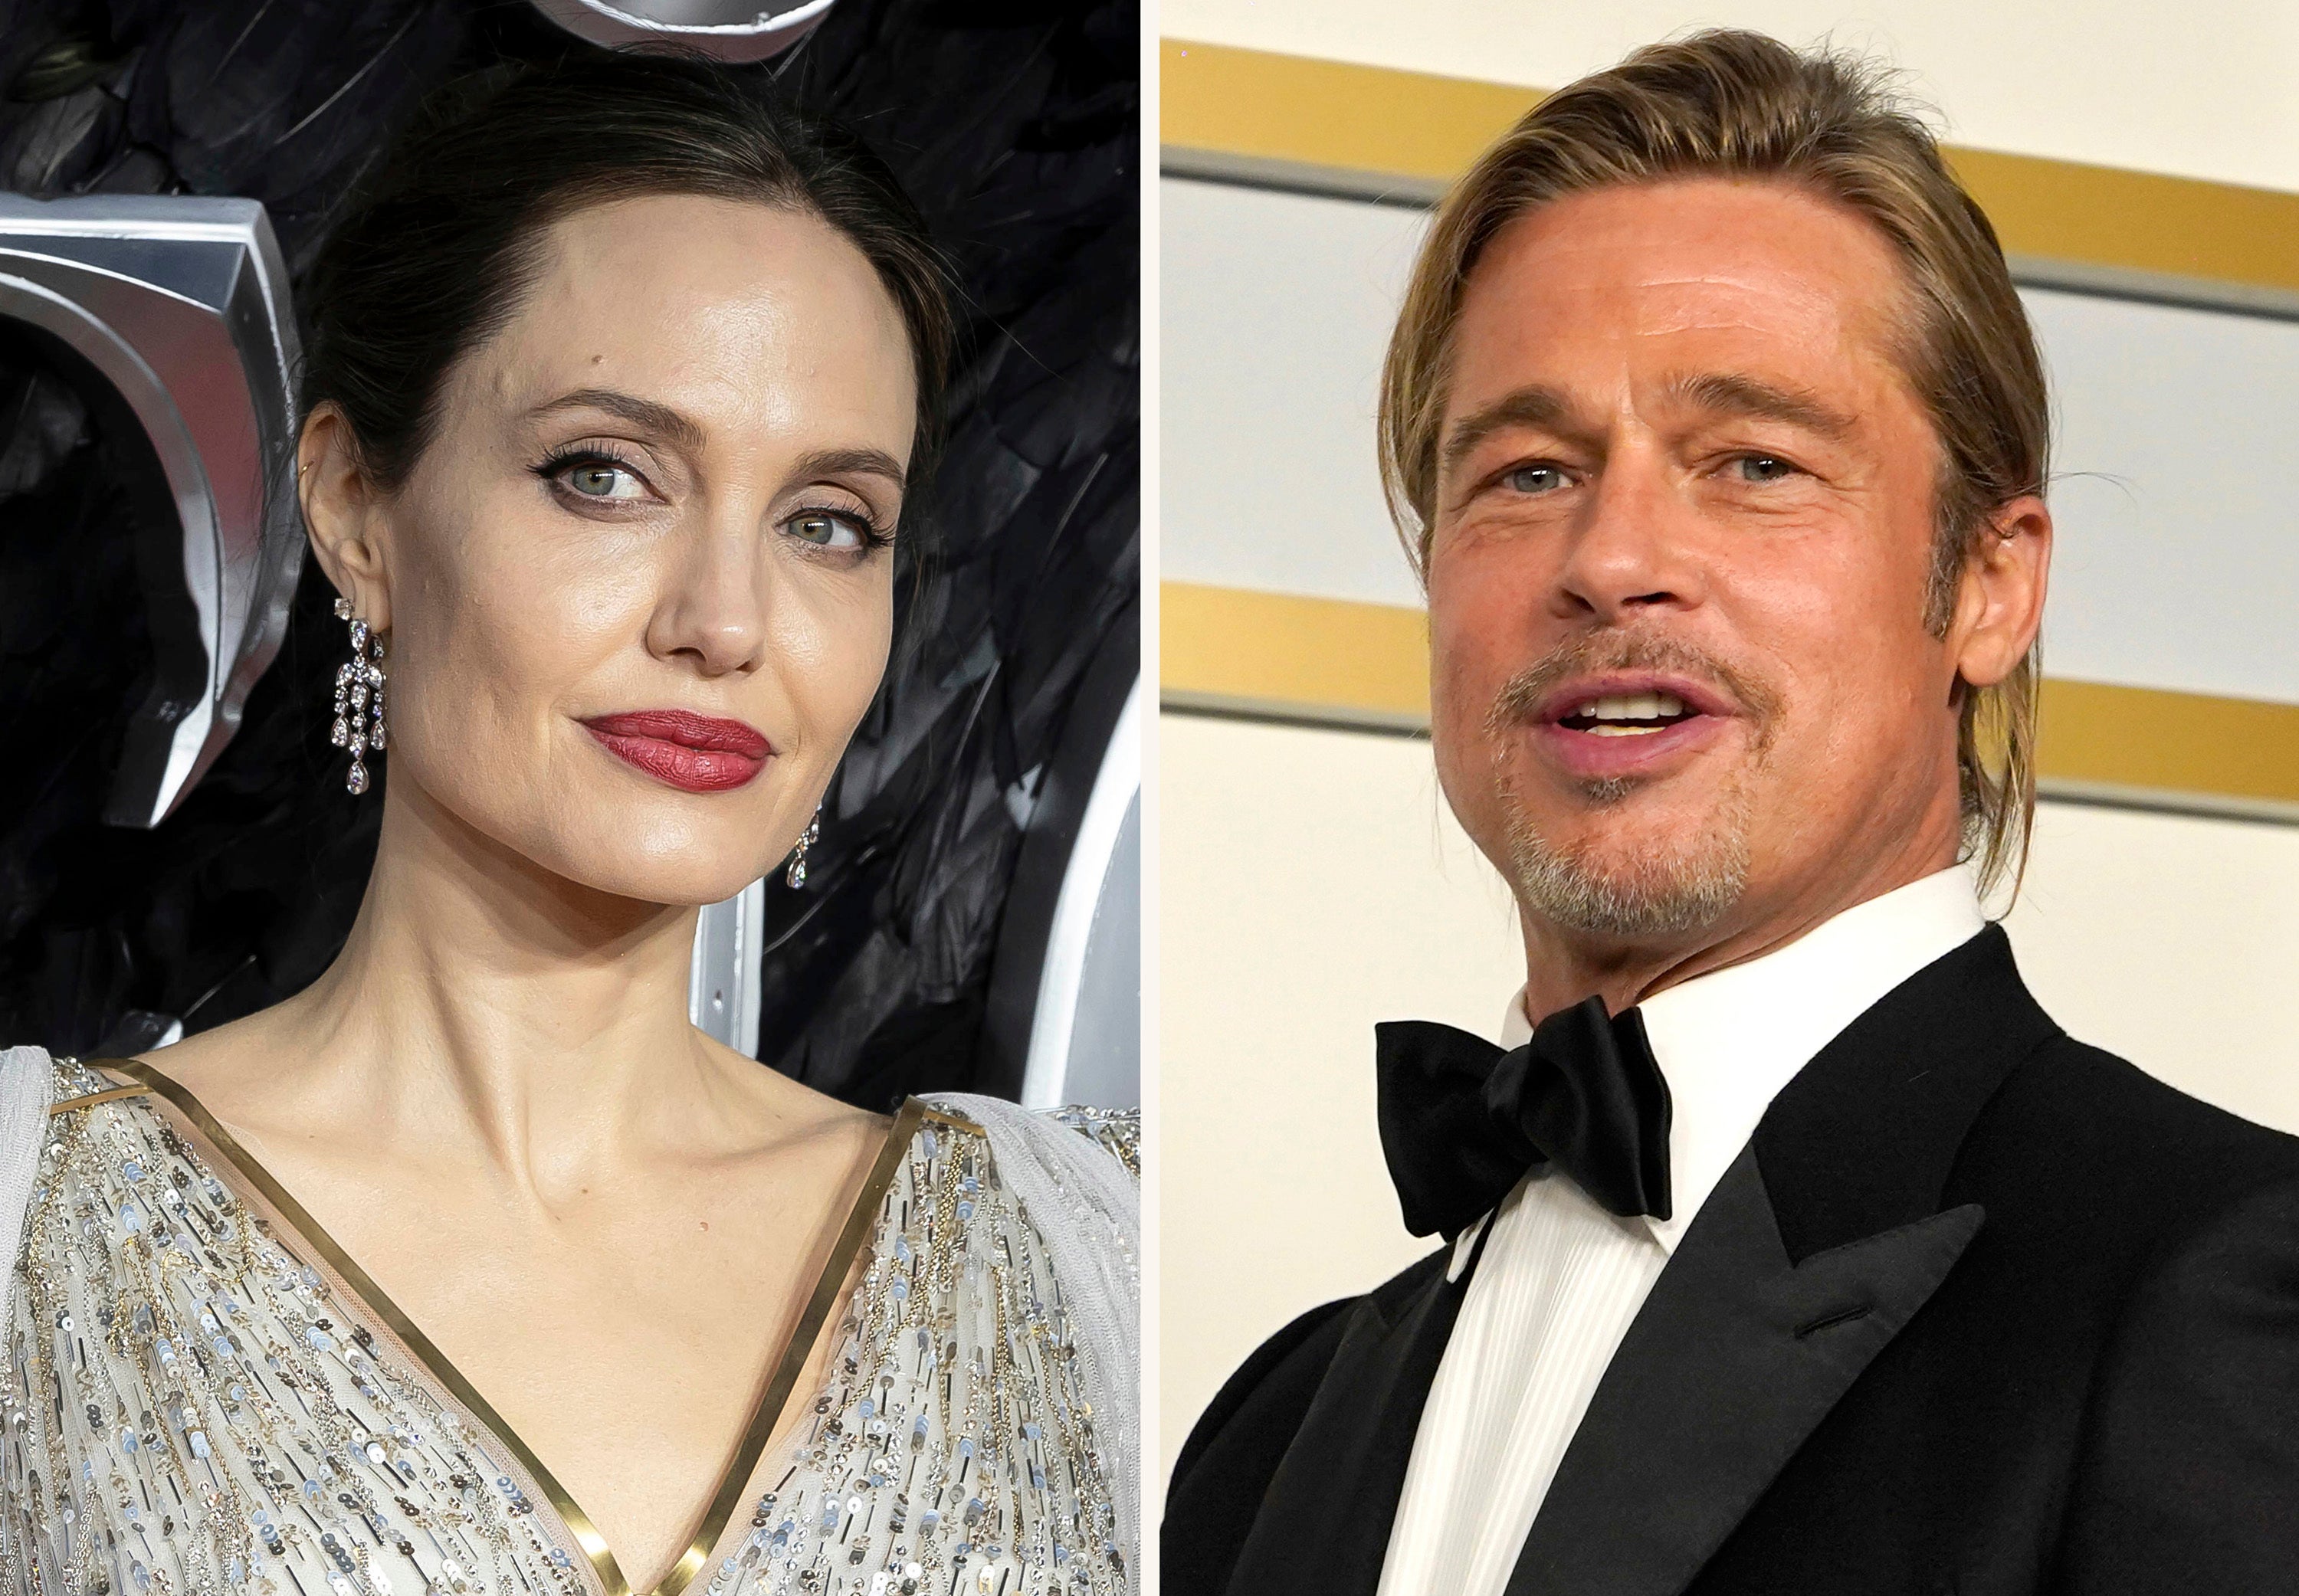 File: Brad Pitt and Angelina Jolie have been locked in a bitter custody battle over their kids since they split up in 2016